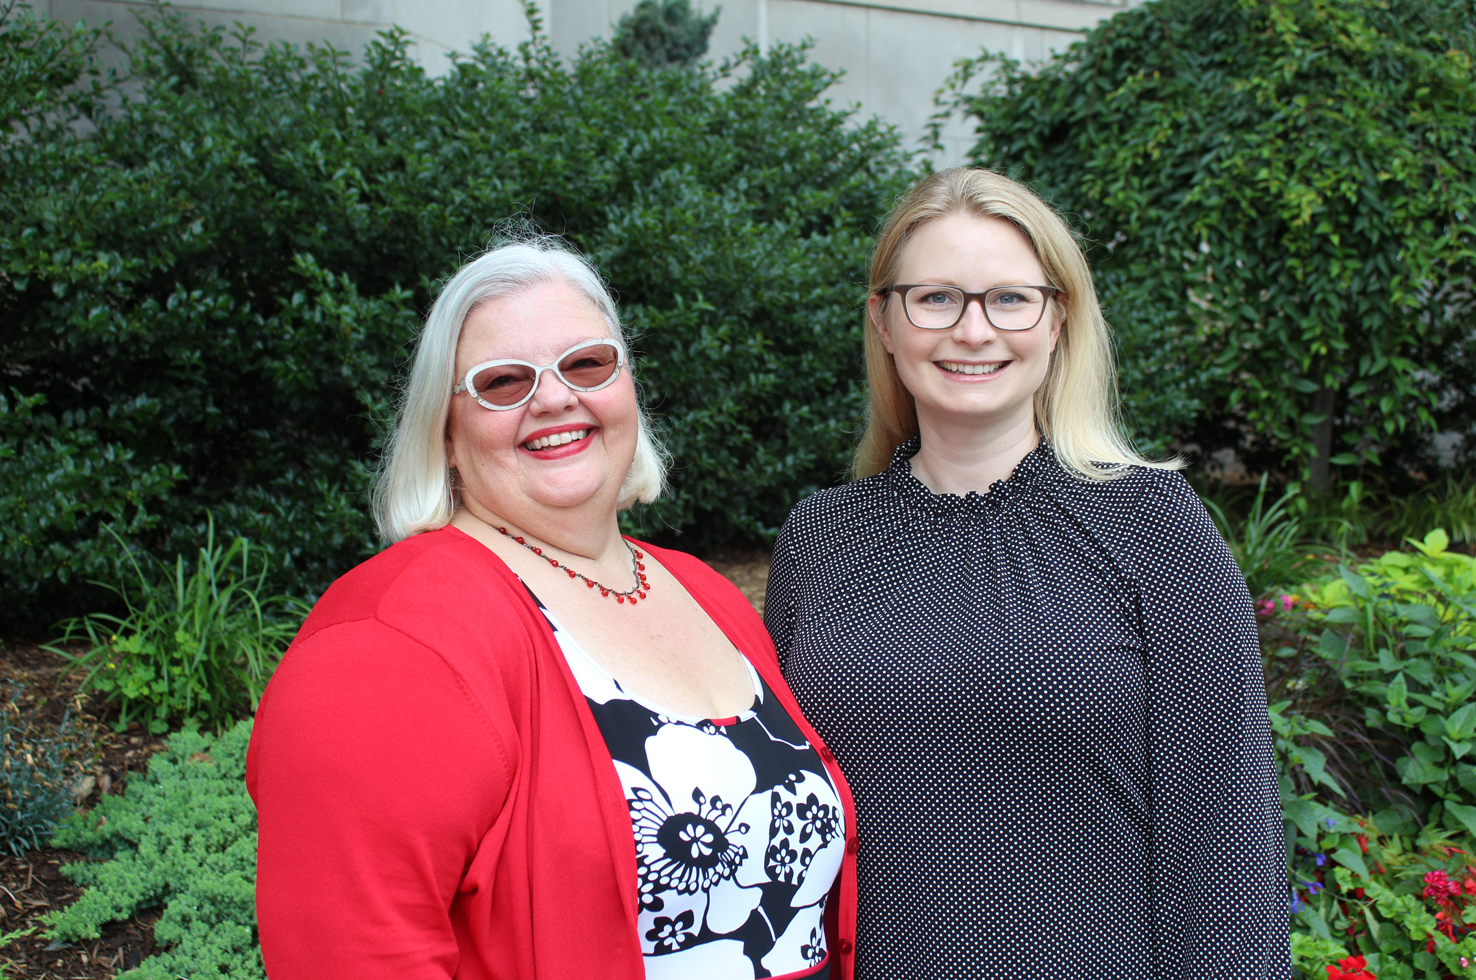 Study co-authors Drs. Mary Ann Kelly and Jill Glauiser